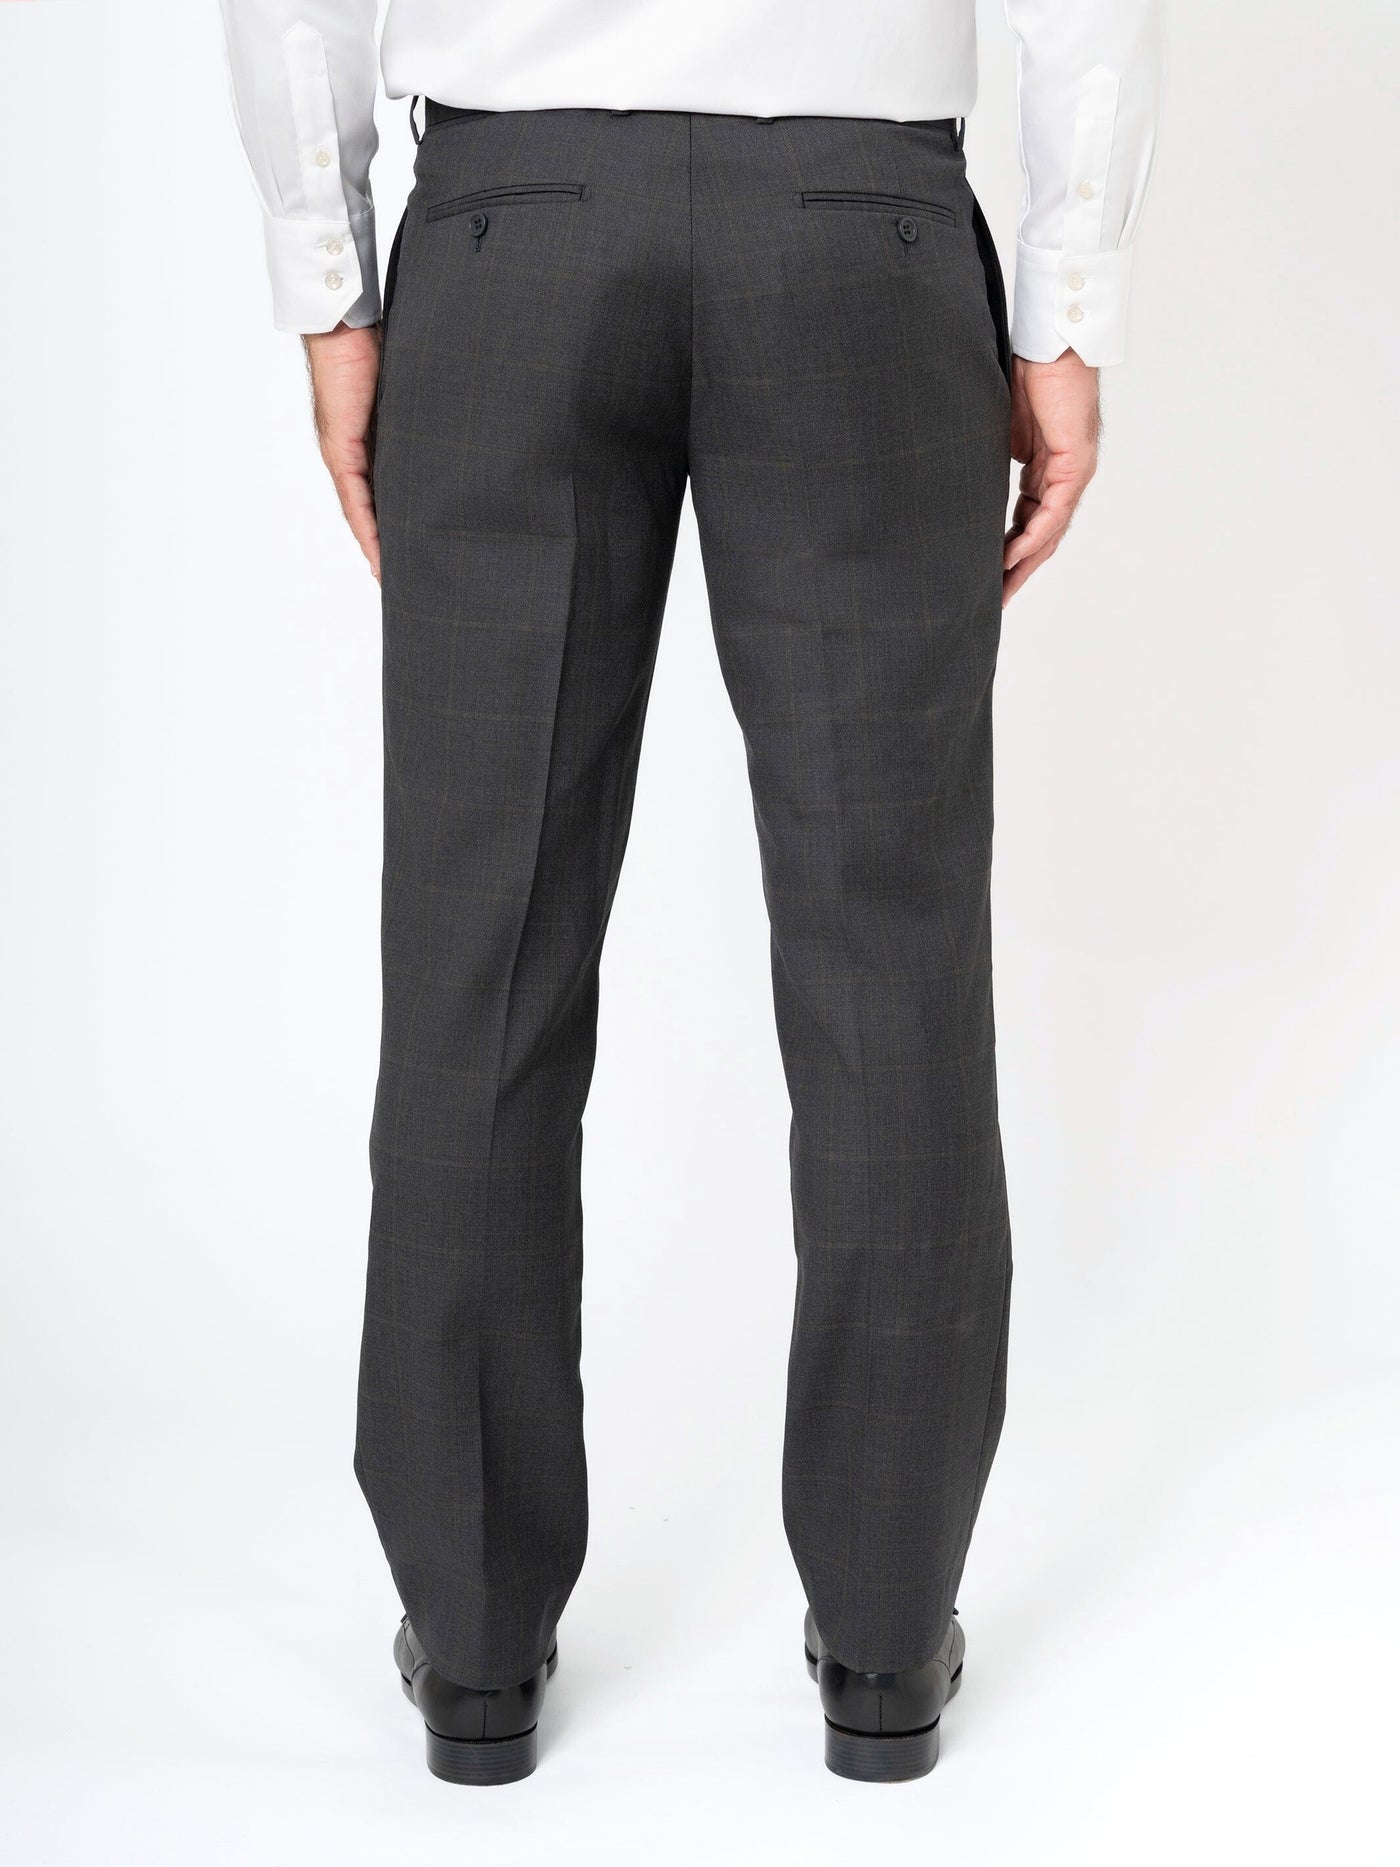 Charcoal with Cognac Windowpane Trouser